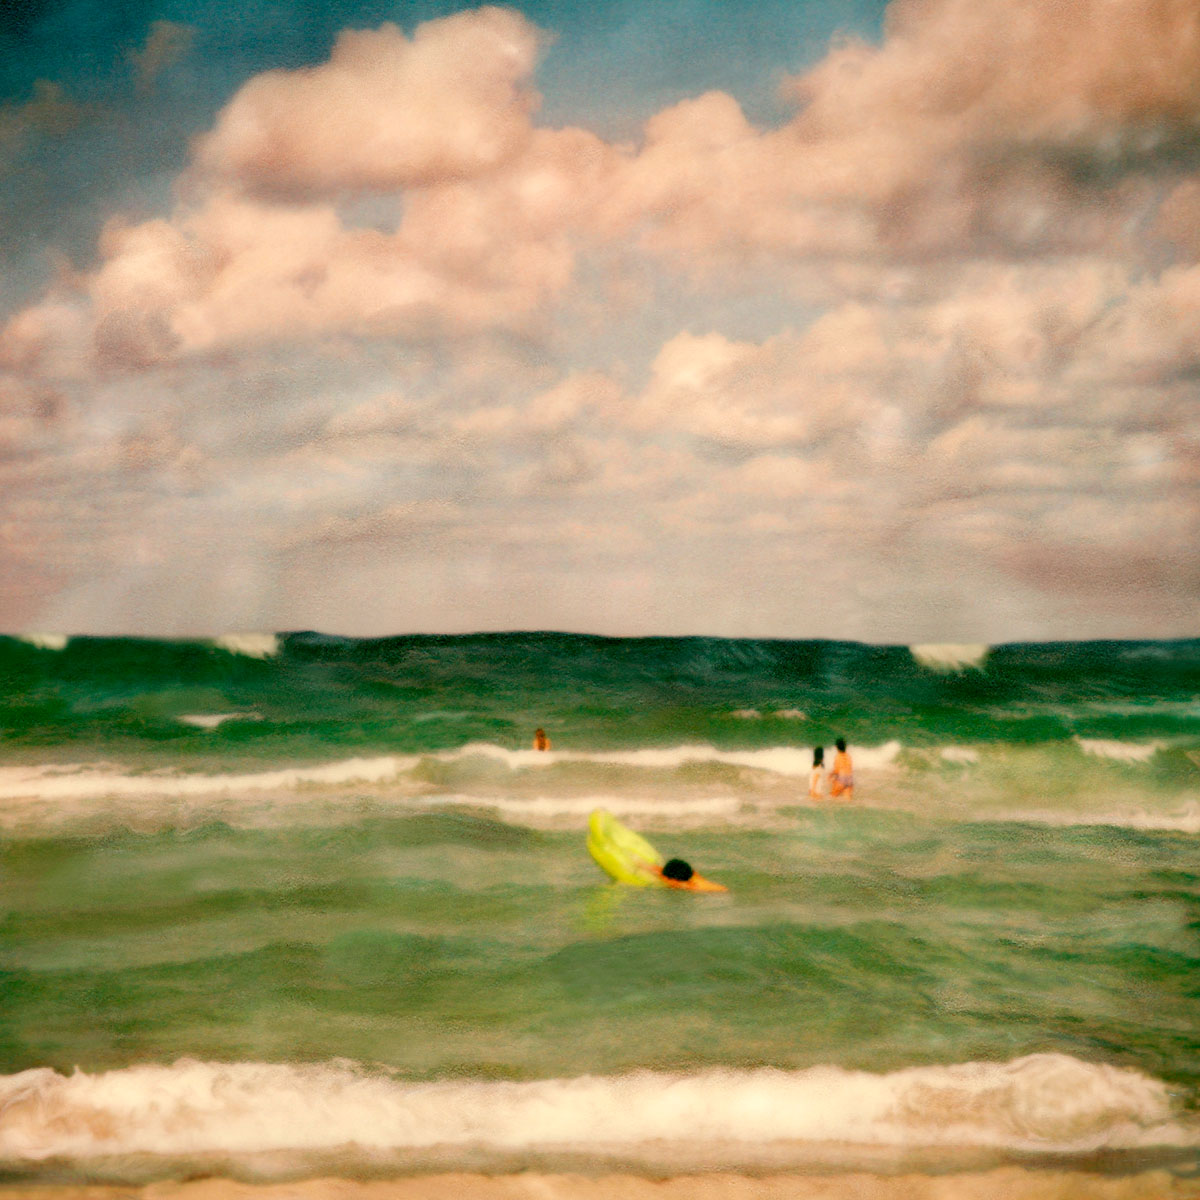 "People Swimming in Green Water"<br>Seascape, Hollywood Beach, FL